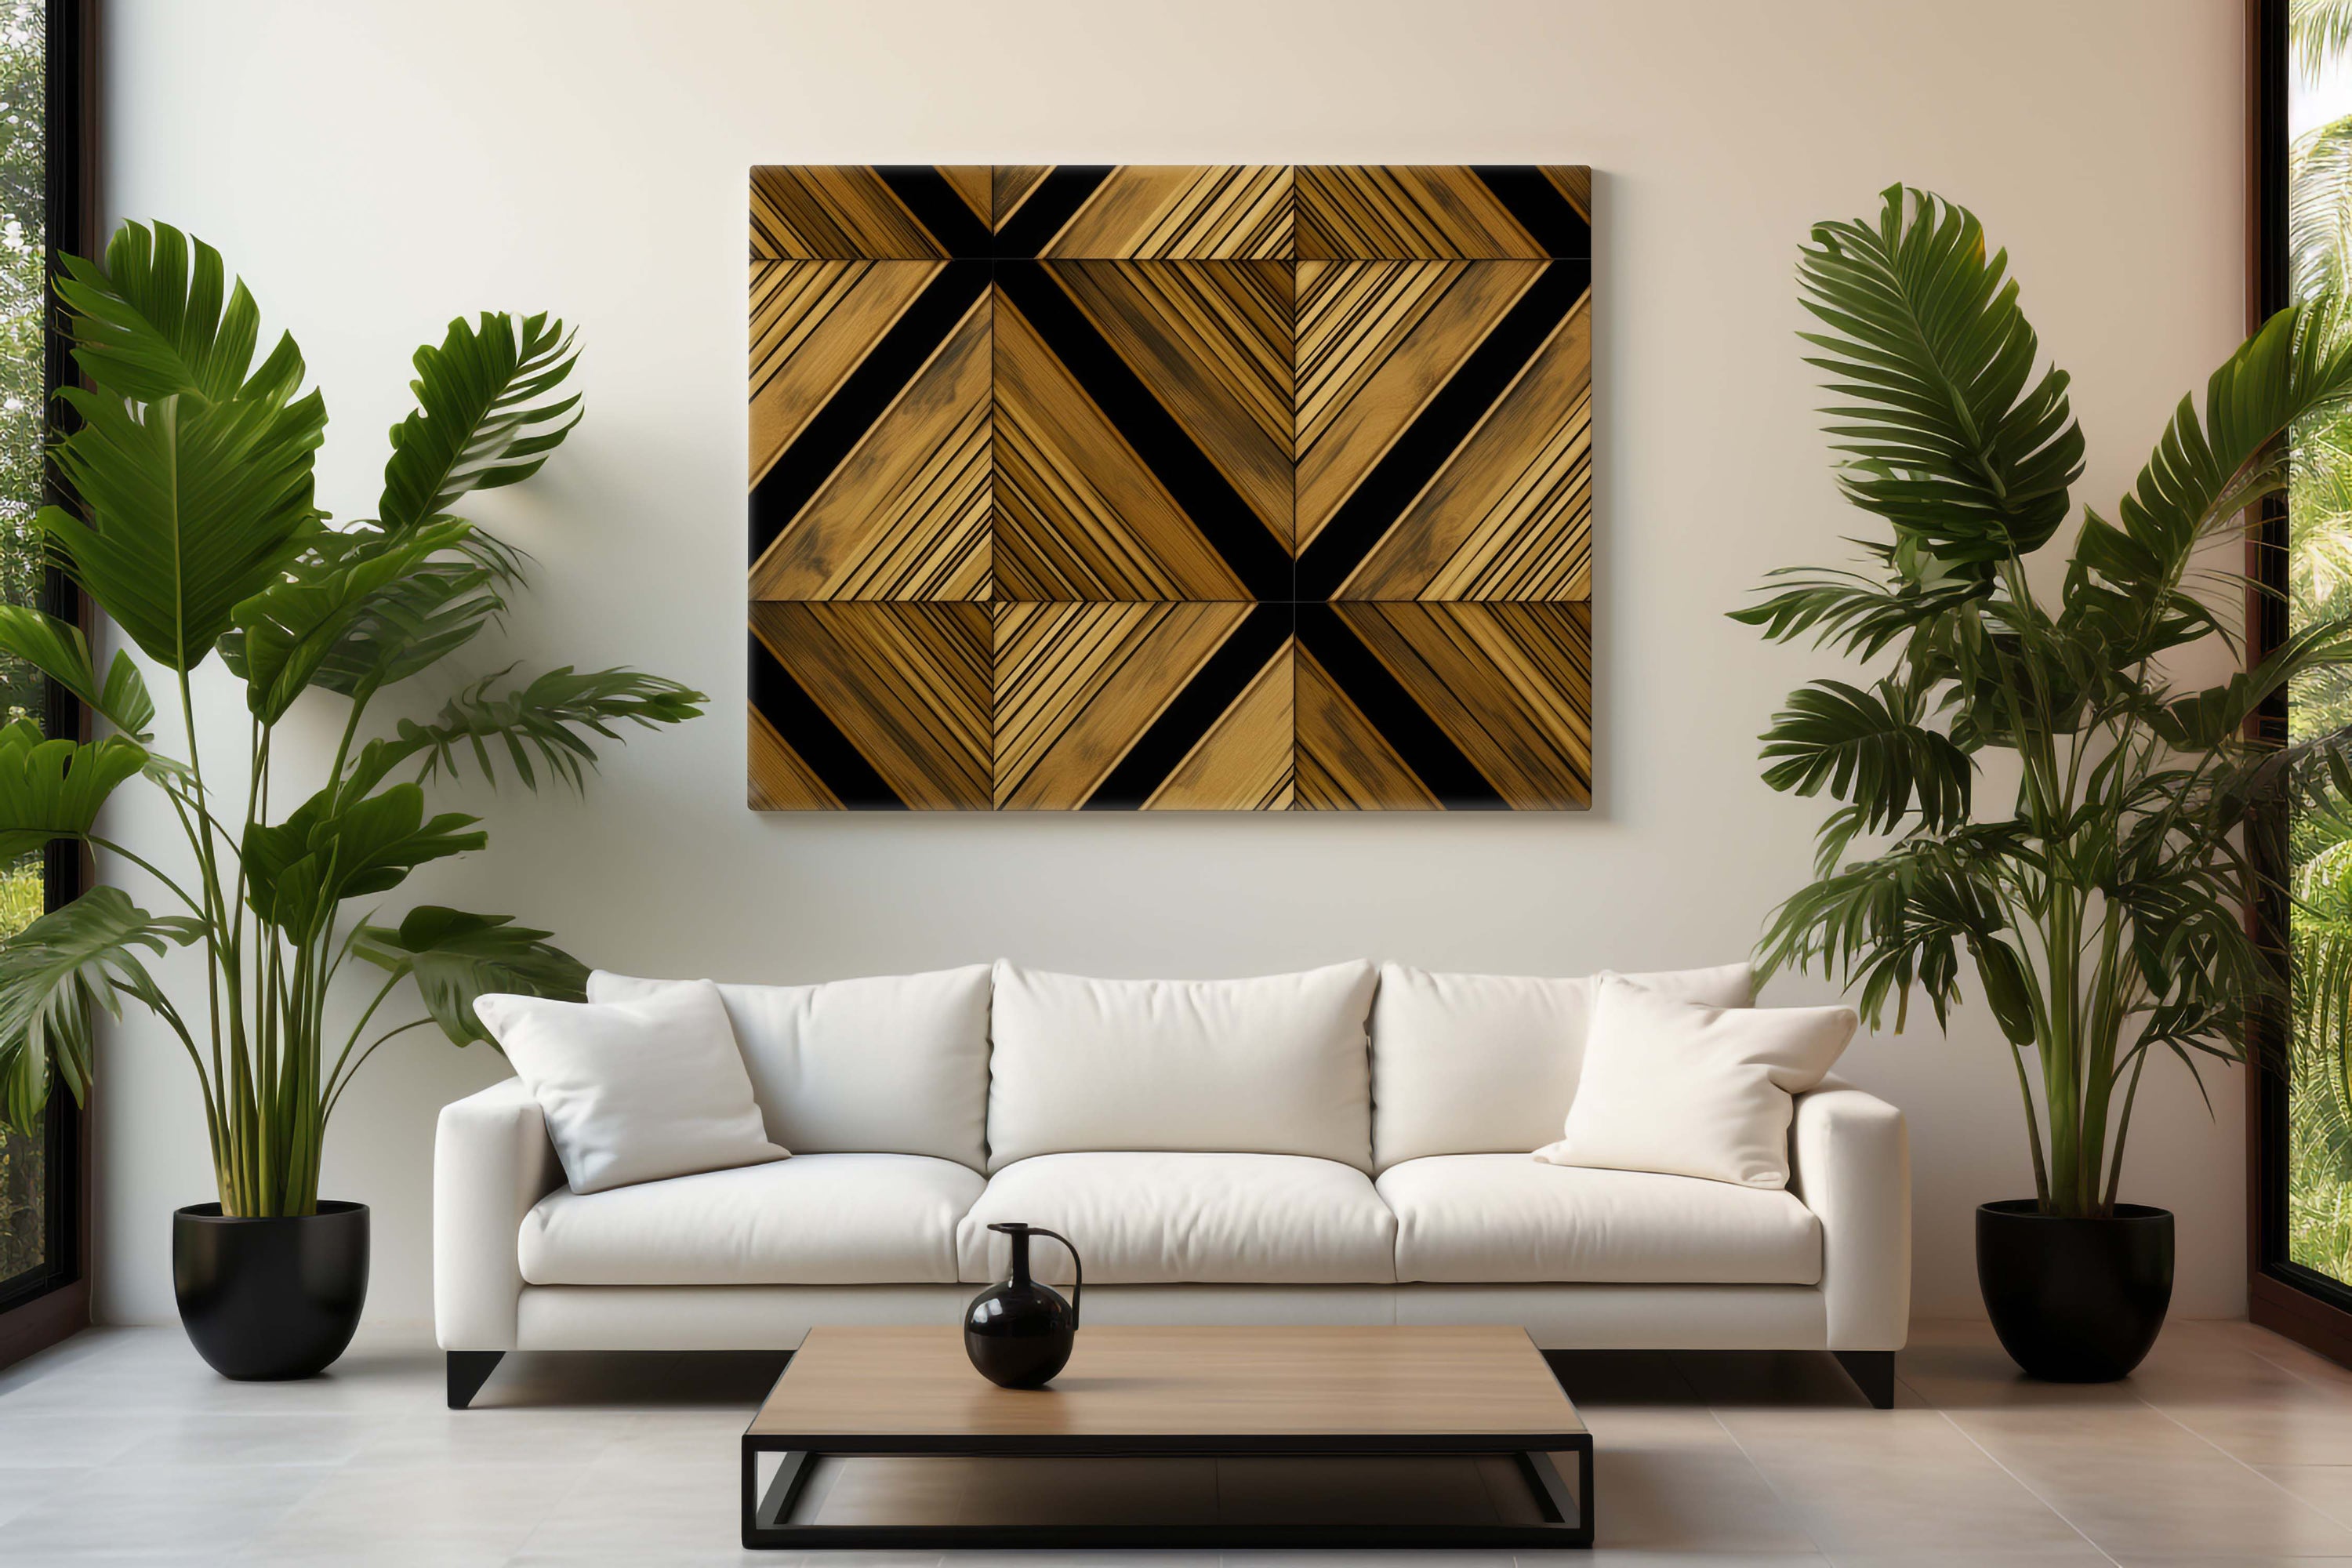 Framed vs. Unframed Canvas: Which is Right for You?